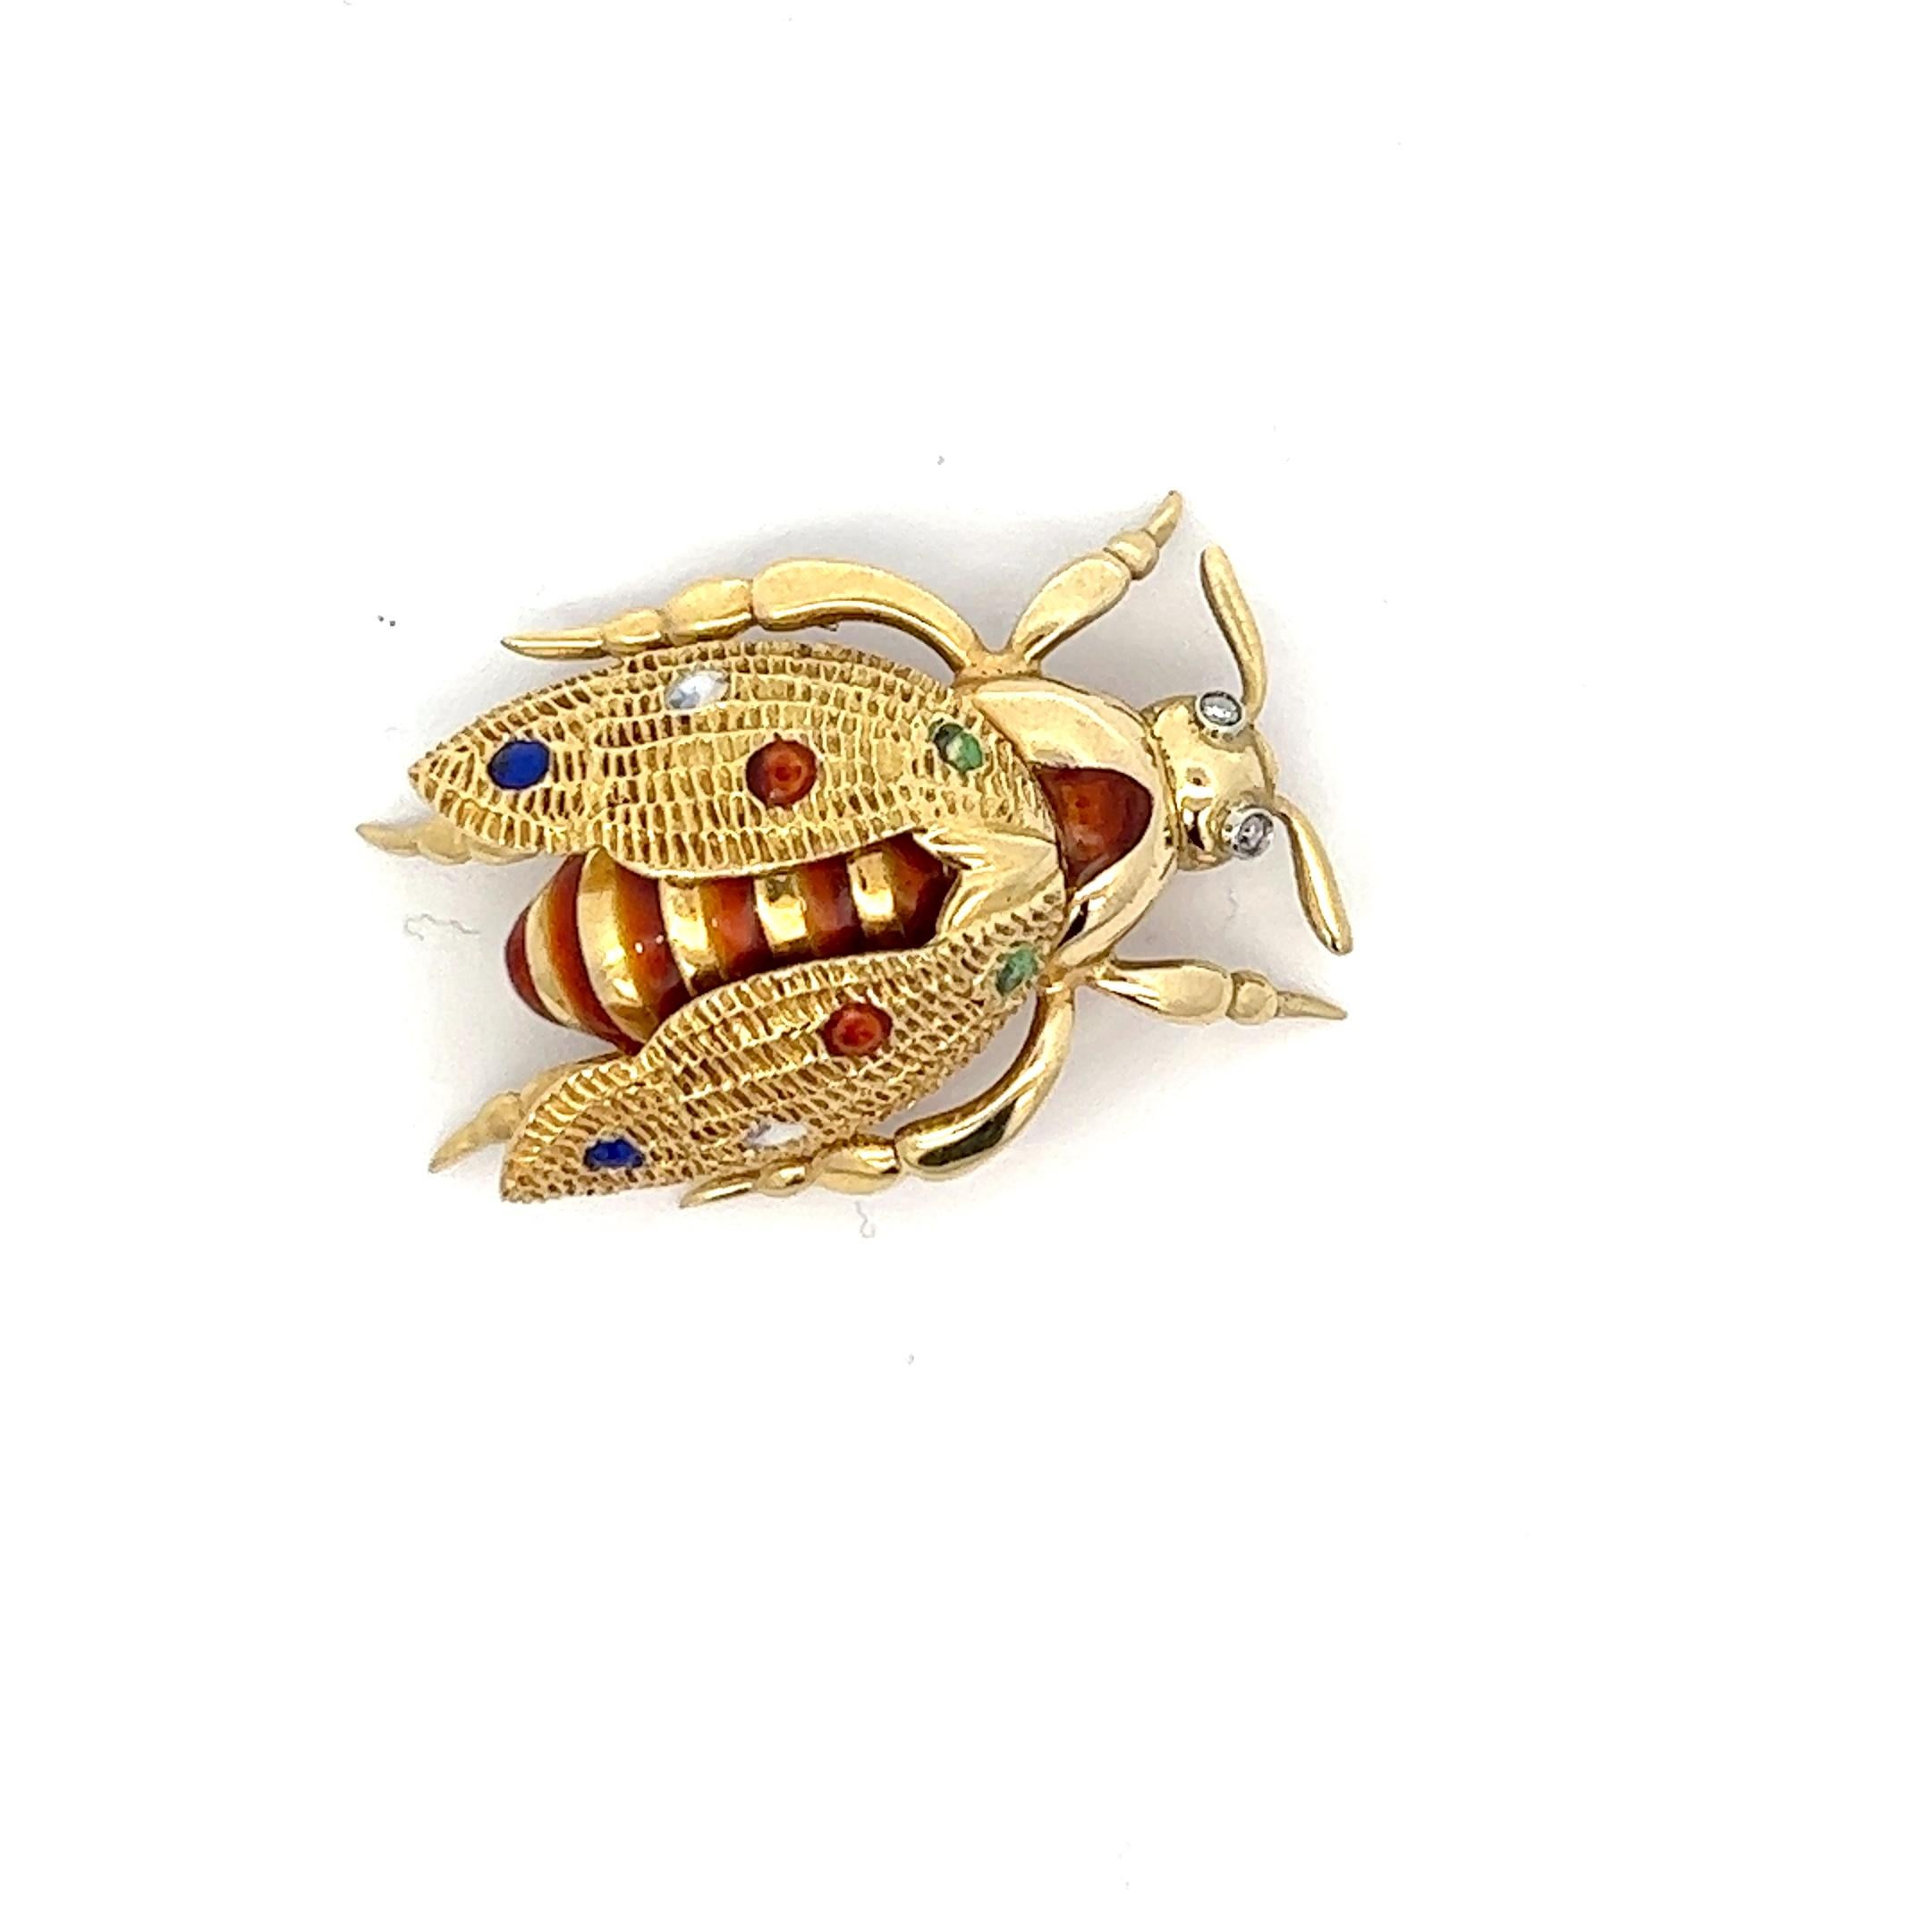 An 18k yellow gold, vari-colored enamel and Diamond beetle brooch by Marco Rigoni.

Total Diamond weight: c irca 0.02ct, graded while in setting.

Origin: Alessandria, Italy.
Age: circa 1970.
Measurements: Circa 3.5 by 2.4 cm.
Weight: circa 12.7